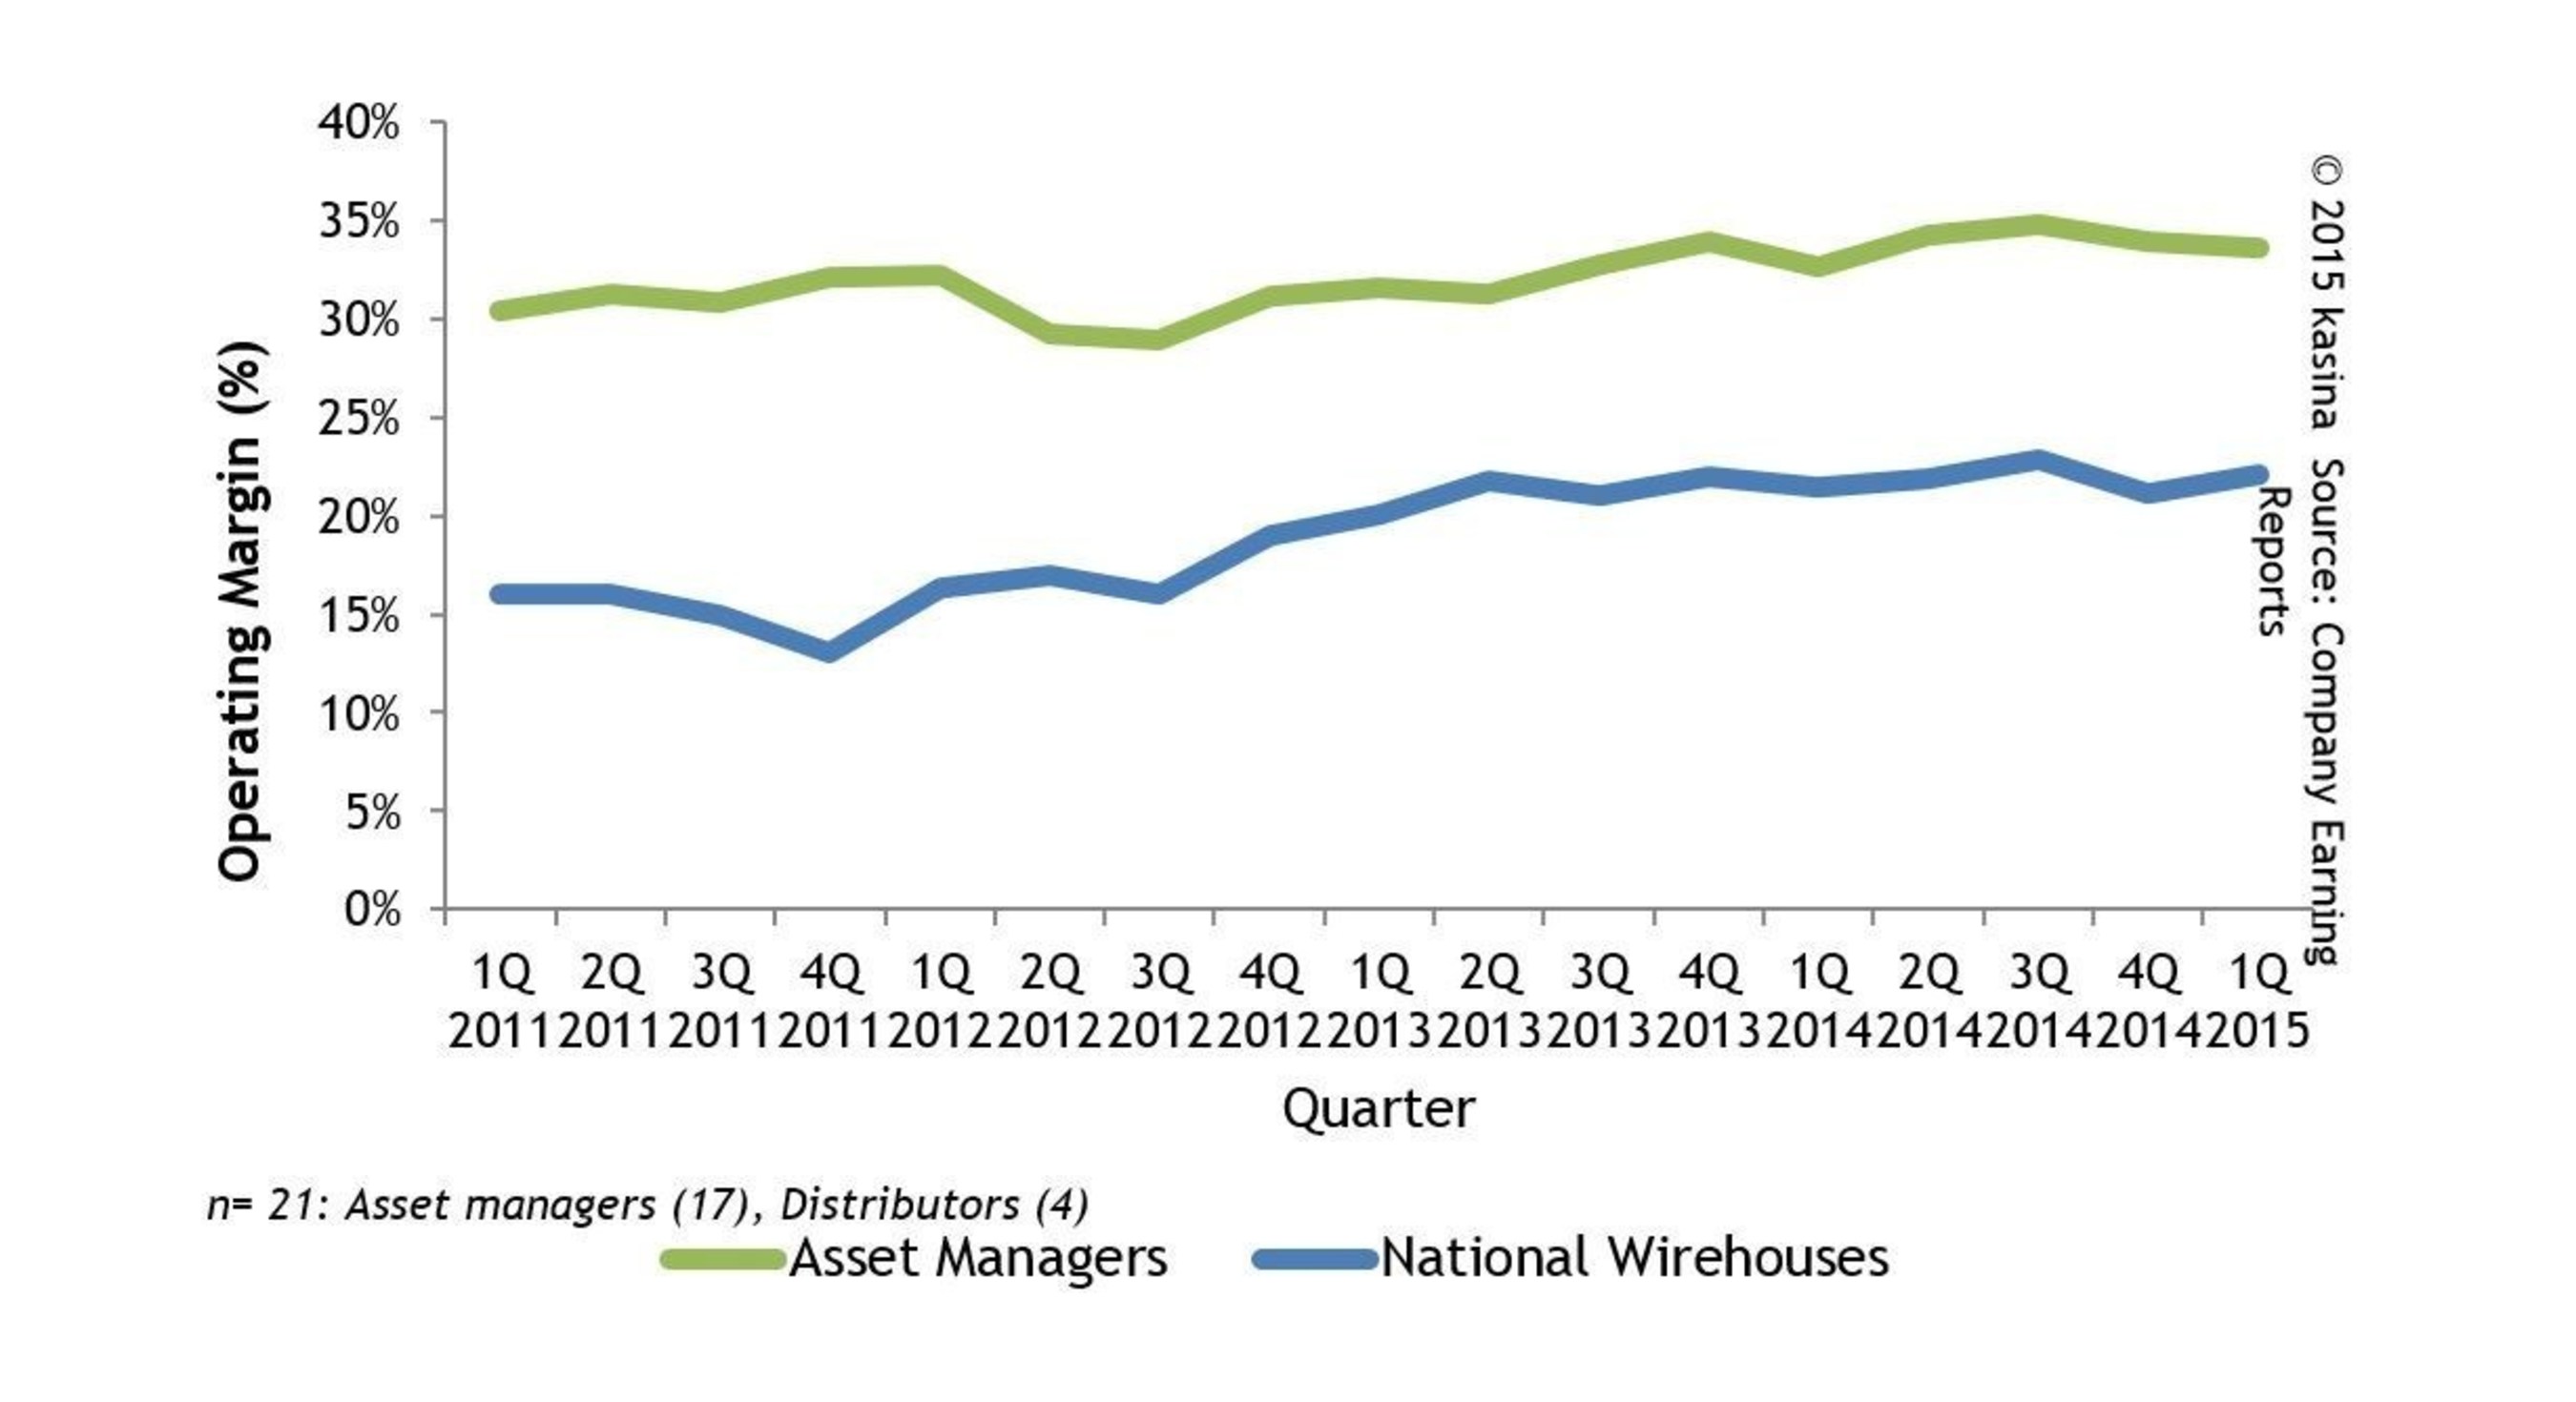 OPERATING AND NET MARGINS FOR ASSET MANAGERS BY QUARTER